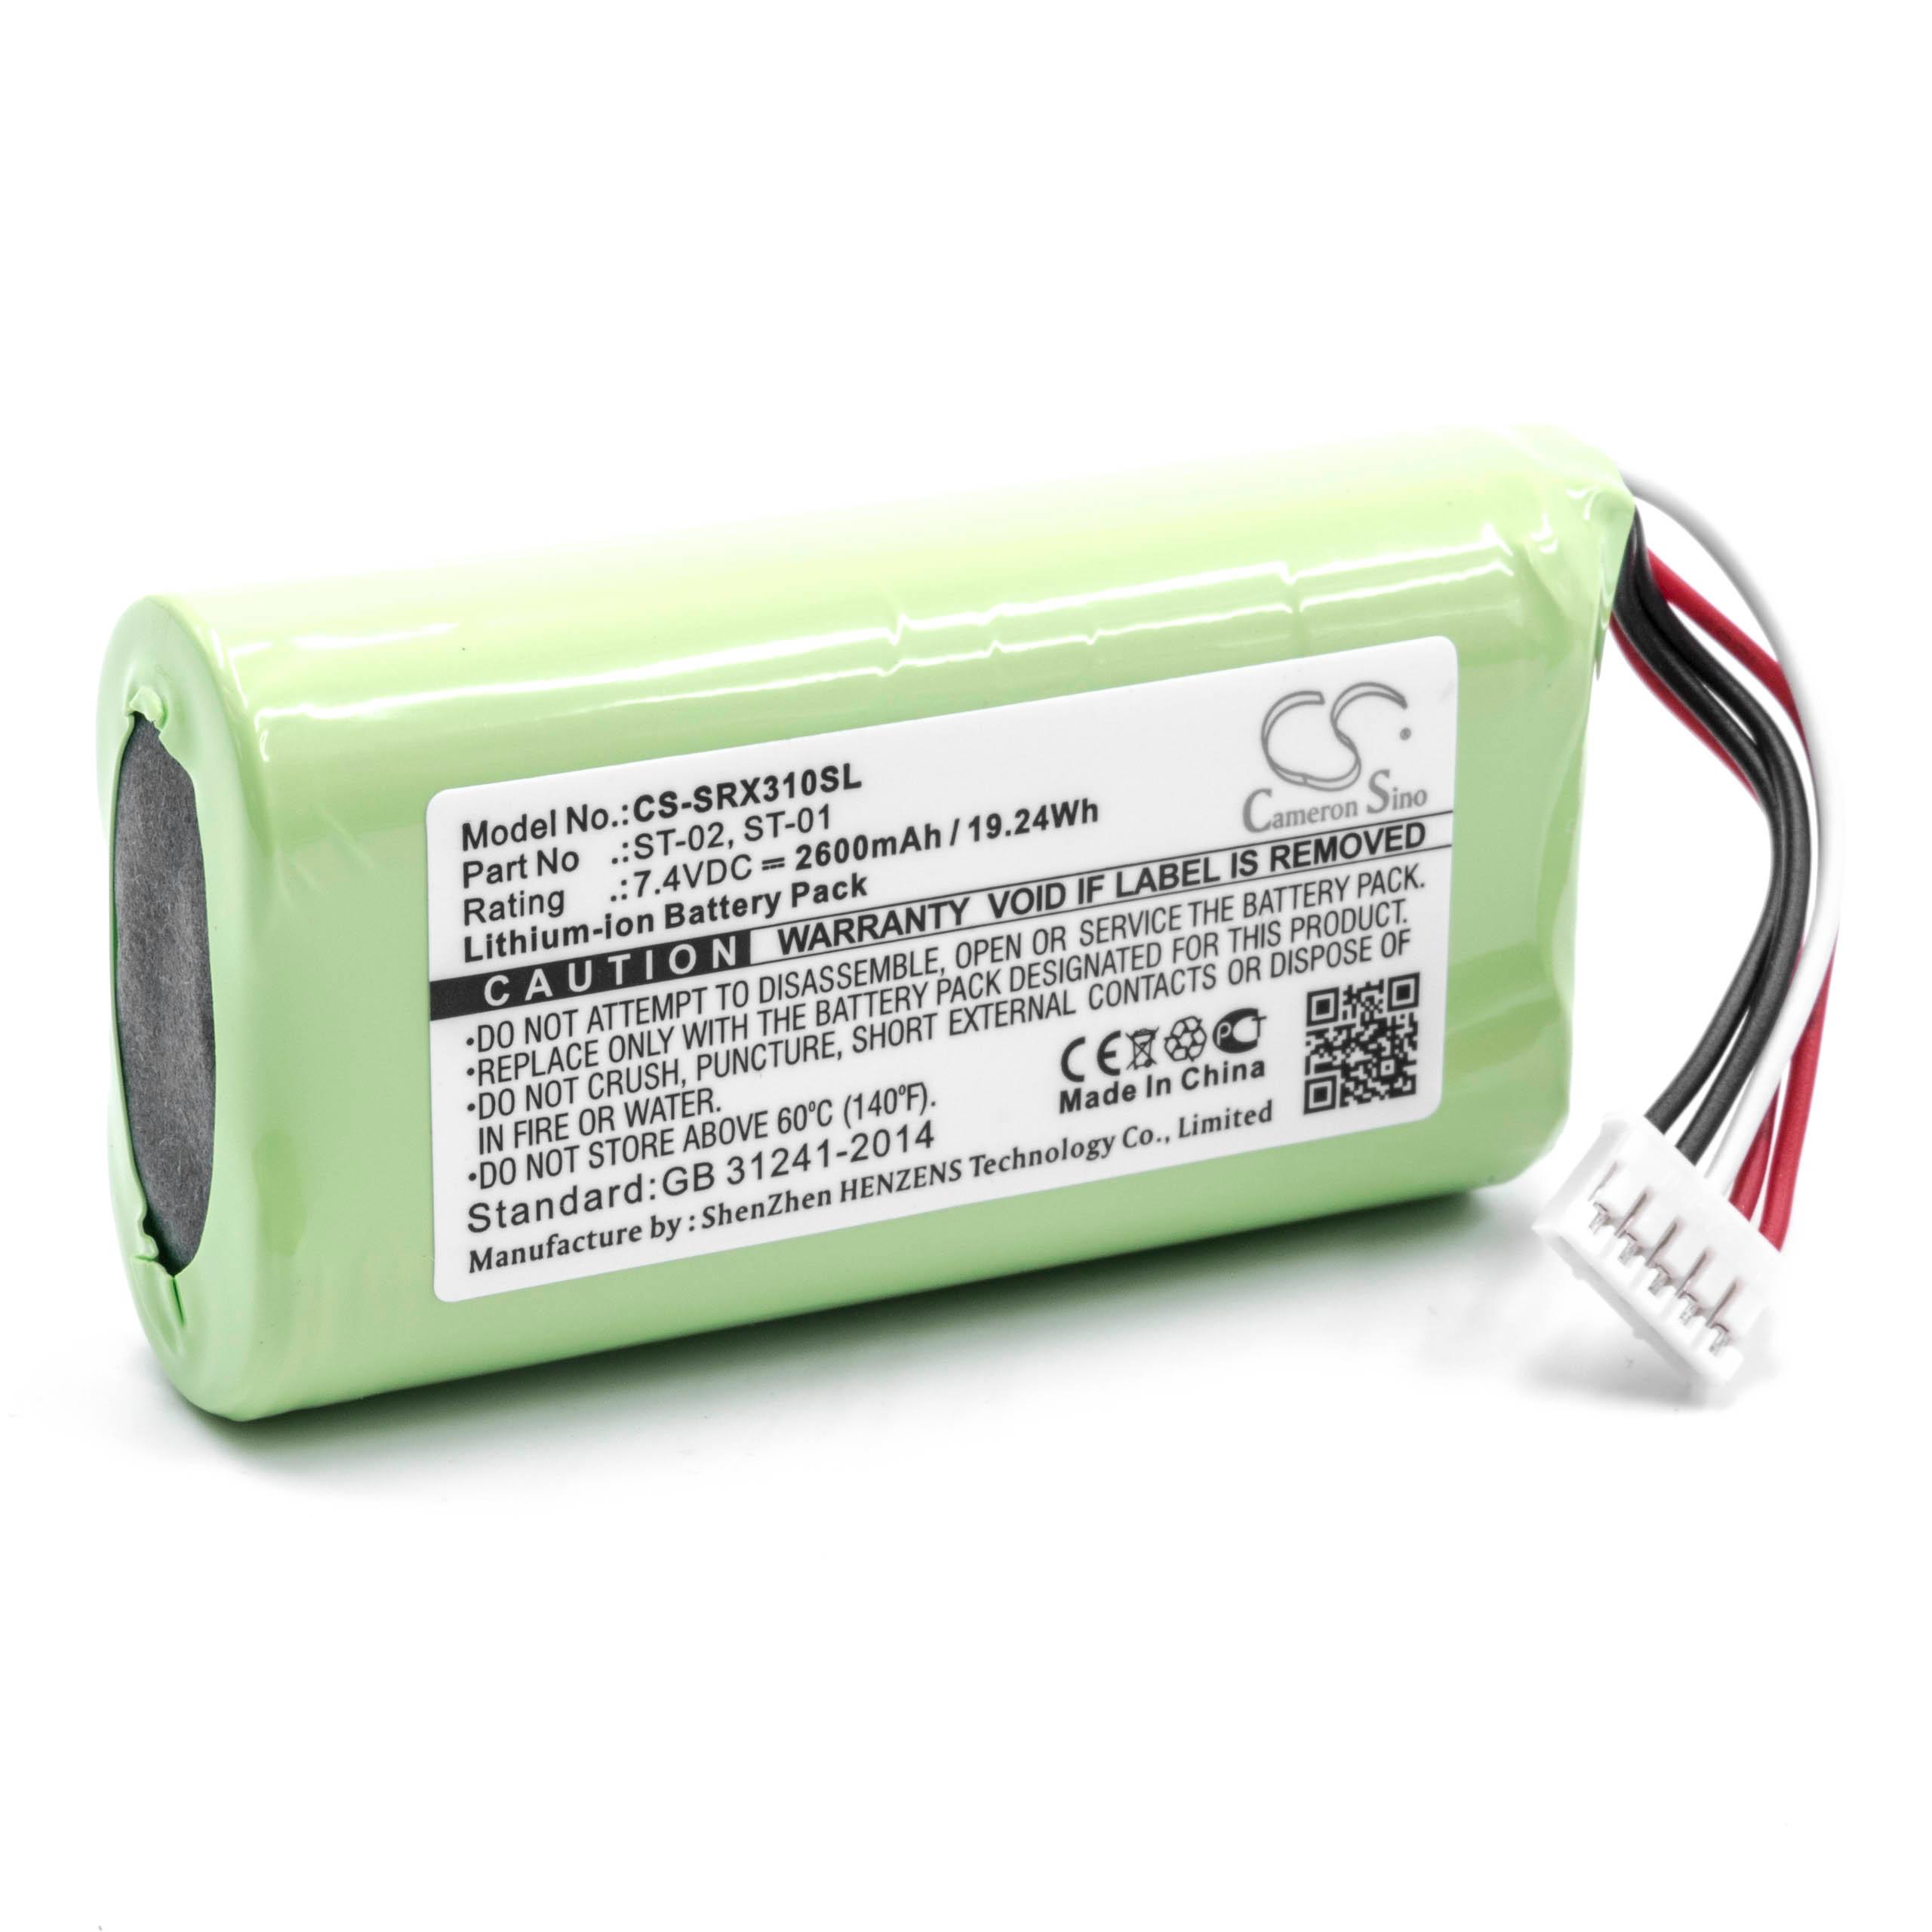  Battery replaces Sony ST-02, ST-01 for SonyLoudspeaker - Li-Ion 2600 mAh